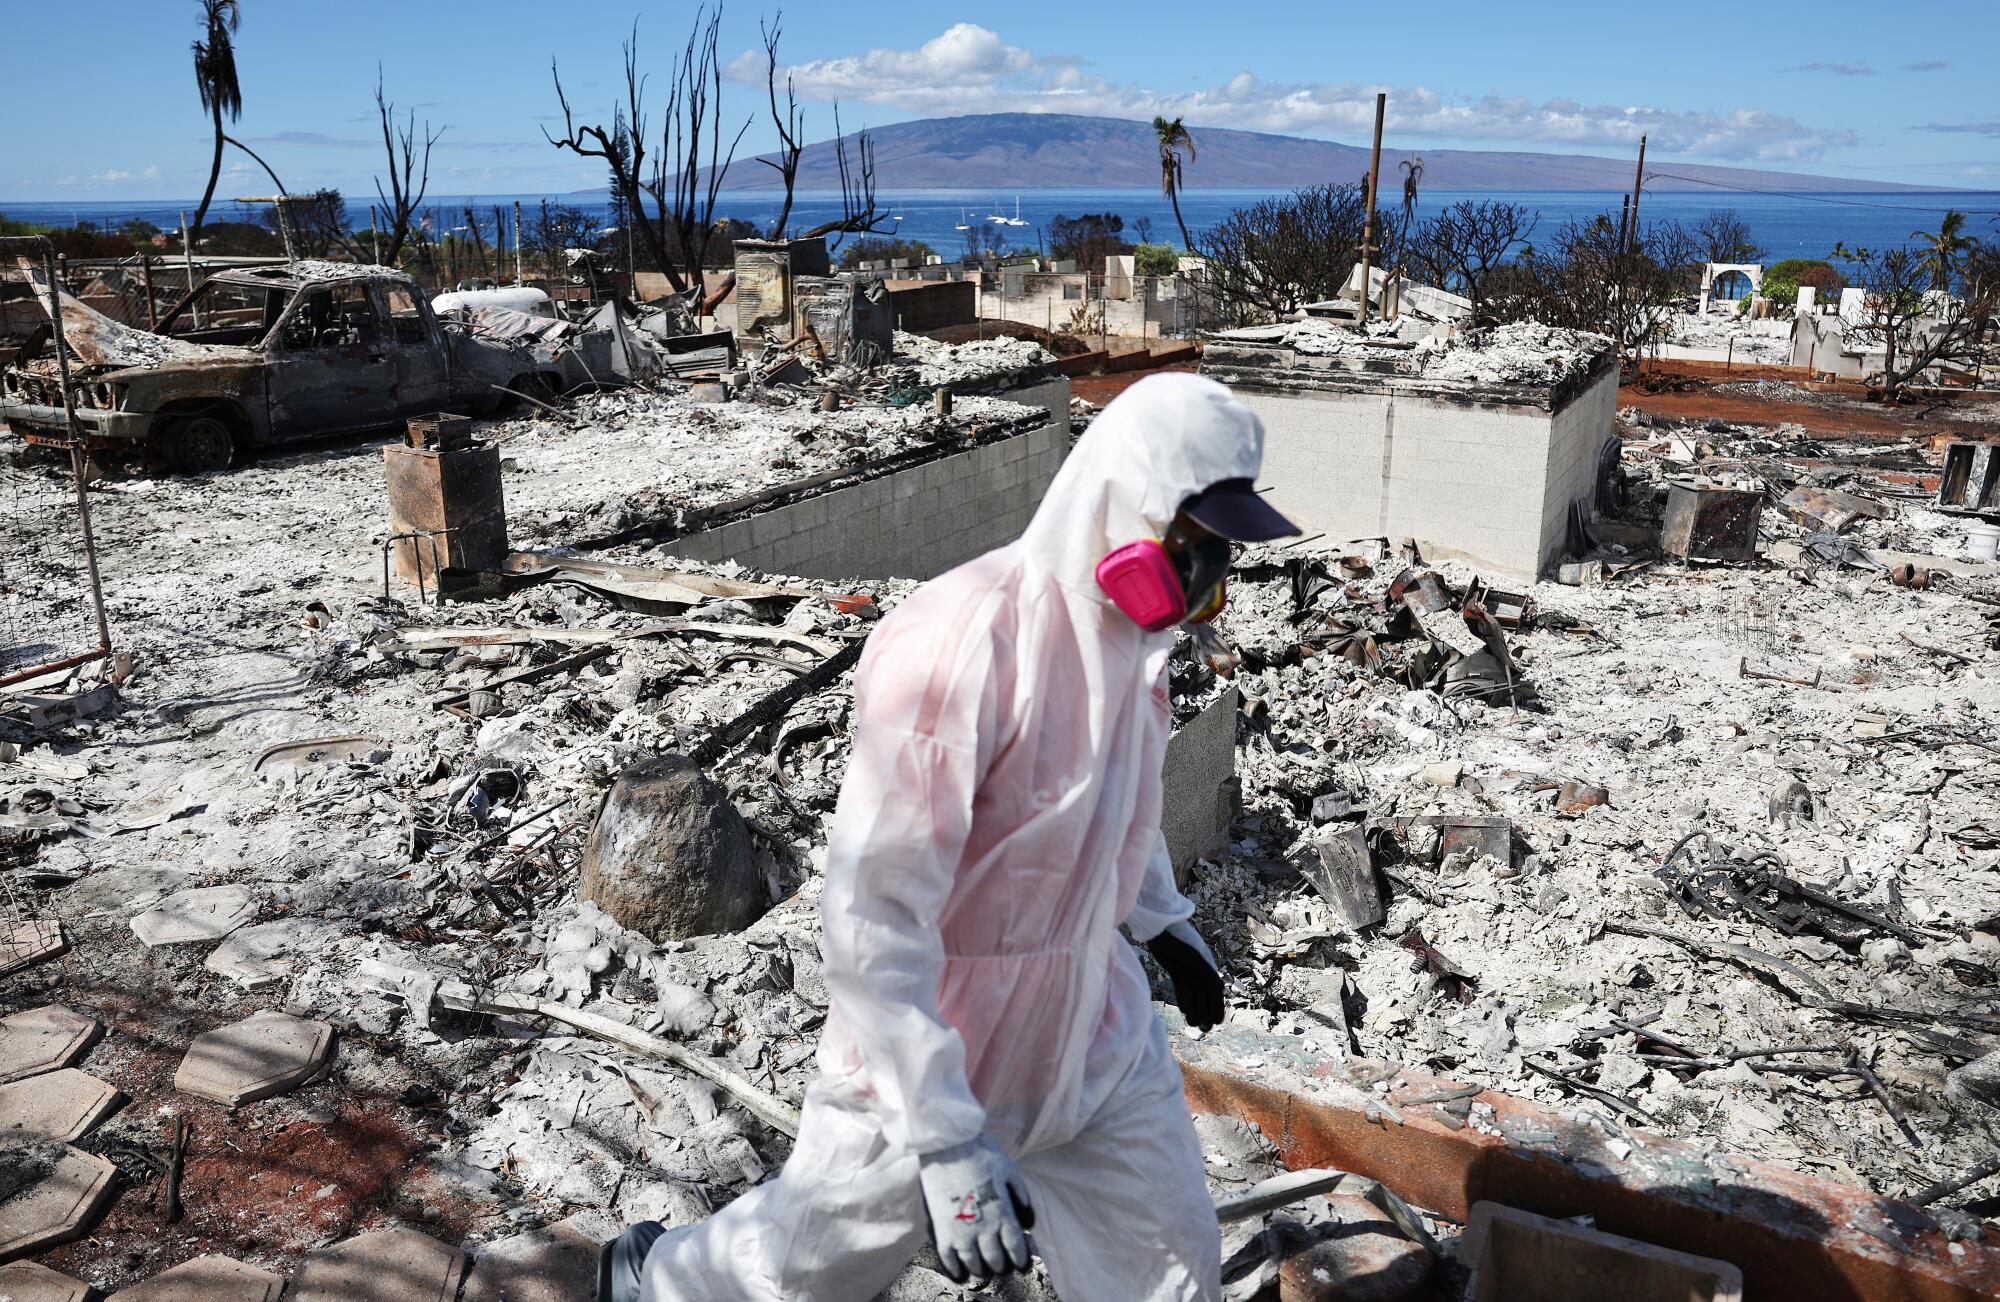 A volunteer in protective gear walks through a burn site in Lahaina, with the ocean in the background.